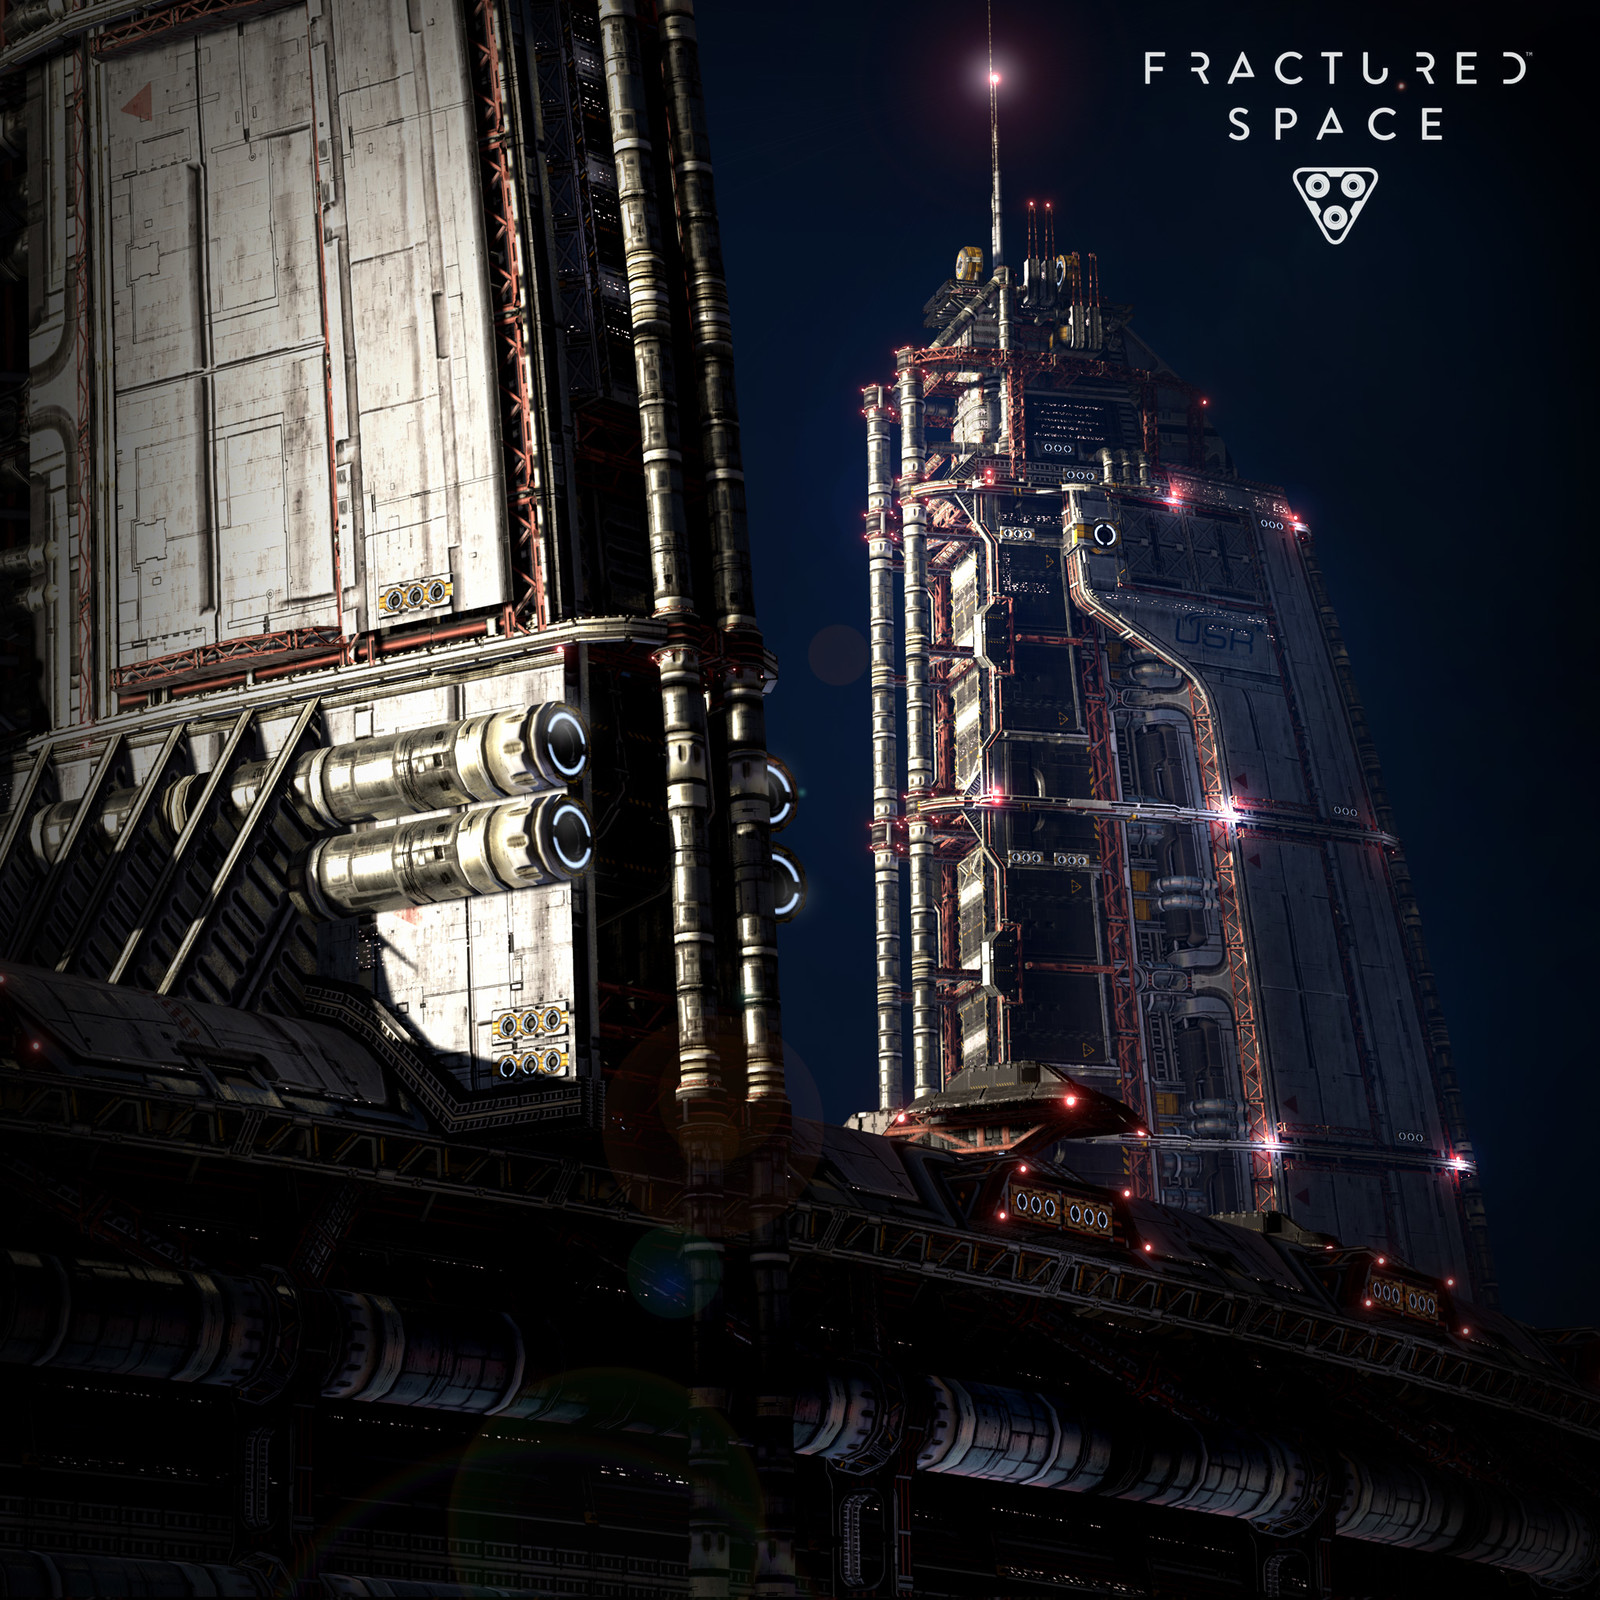 Home Base Station - Fractured Space